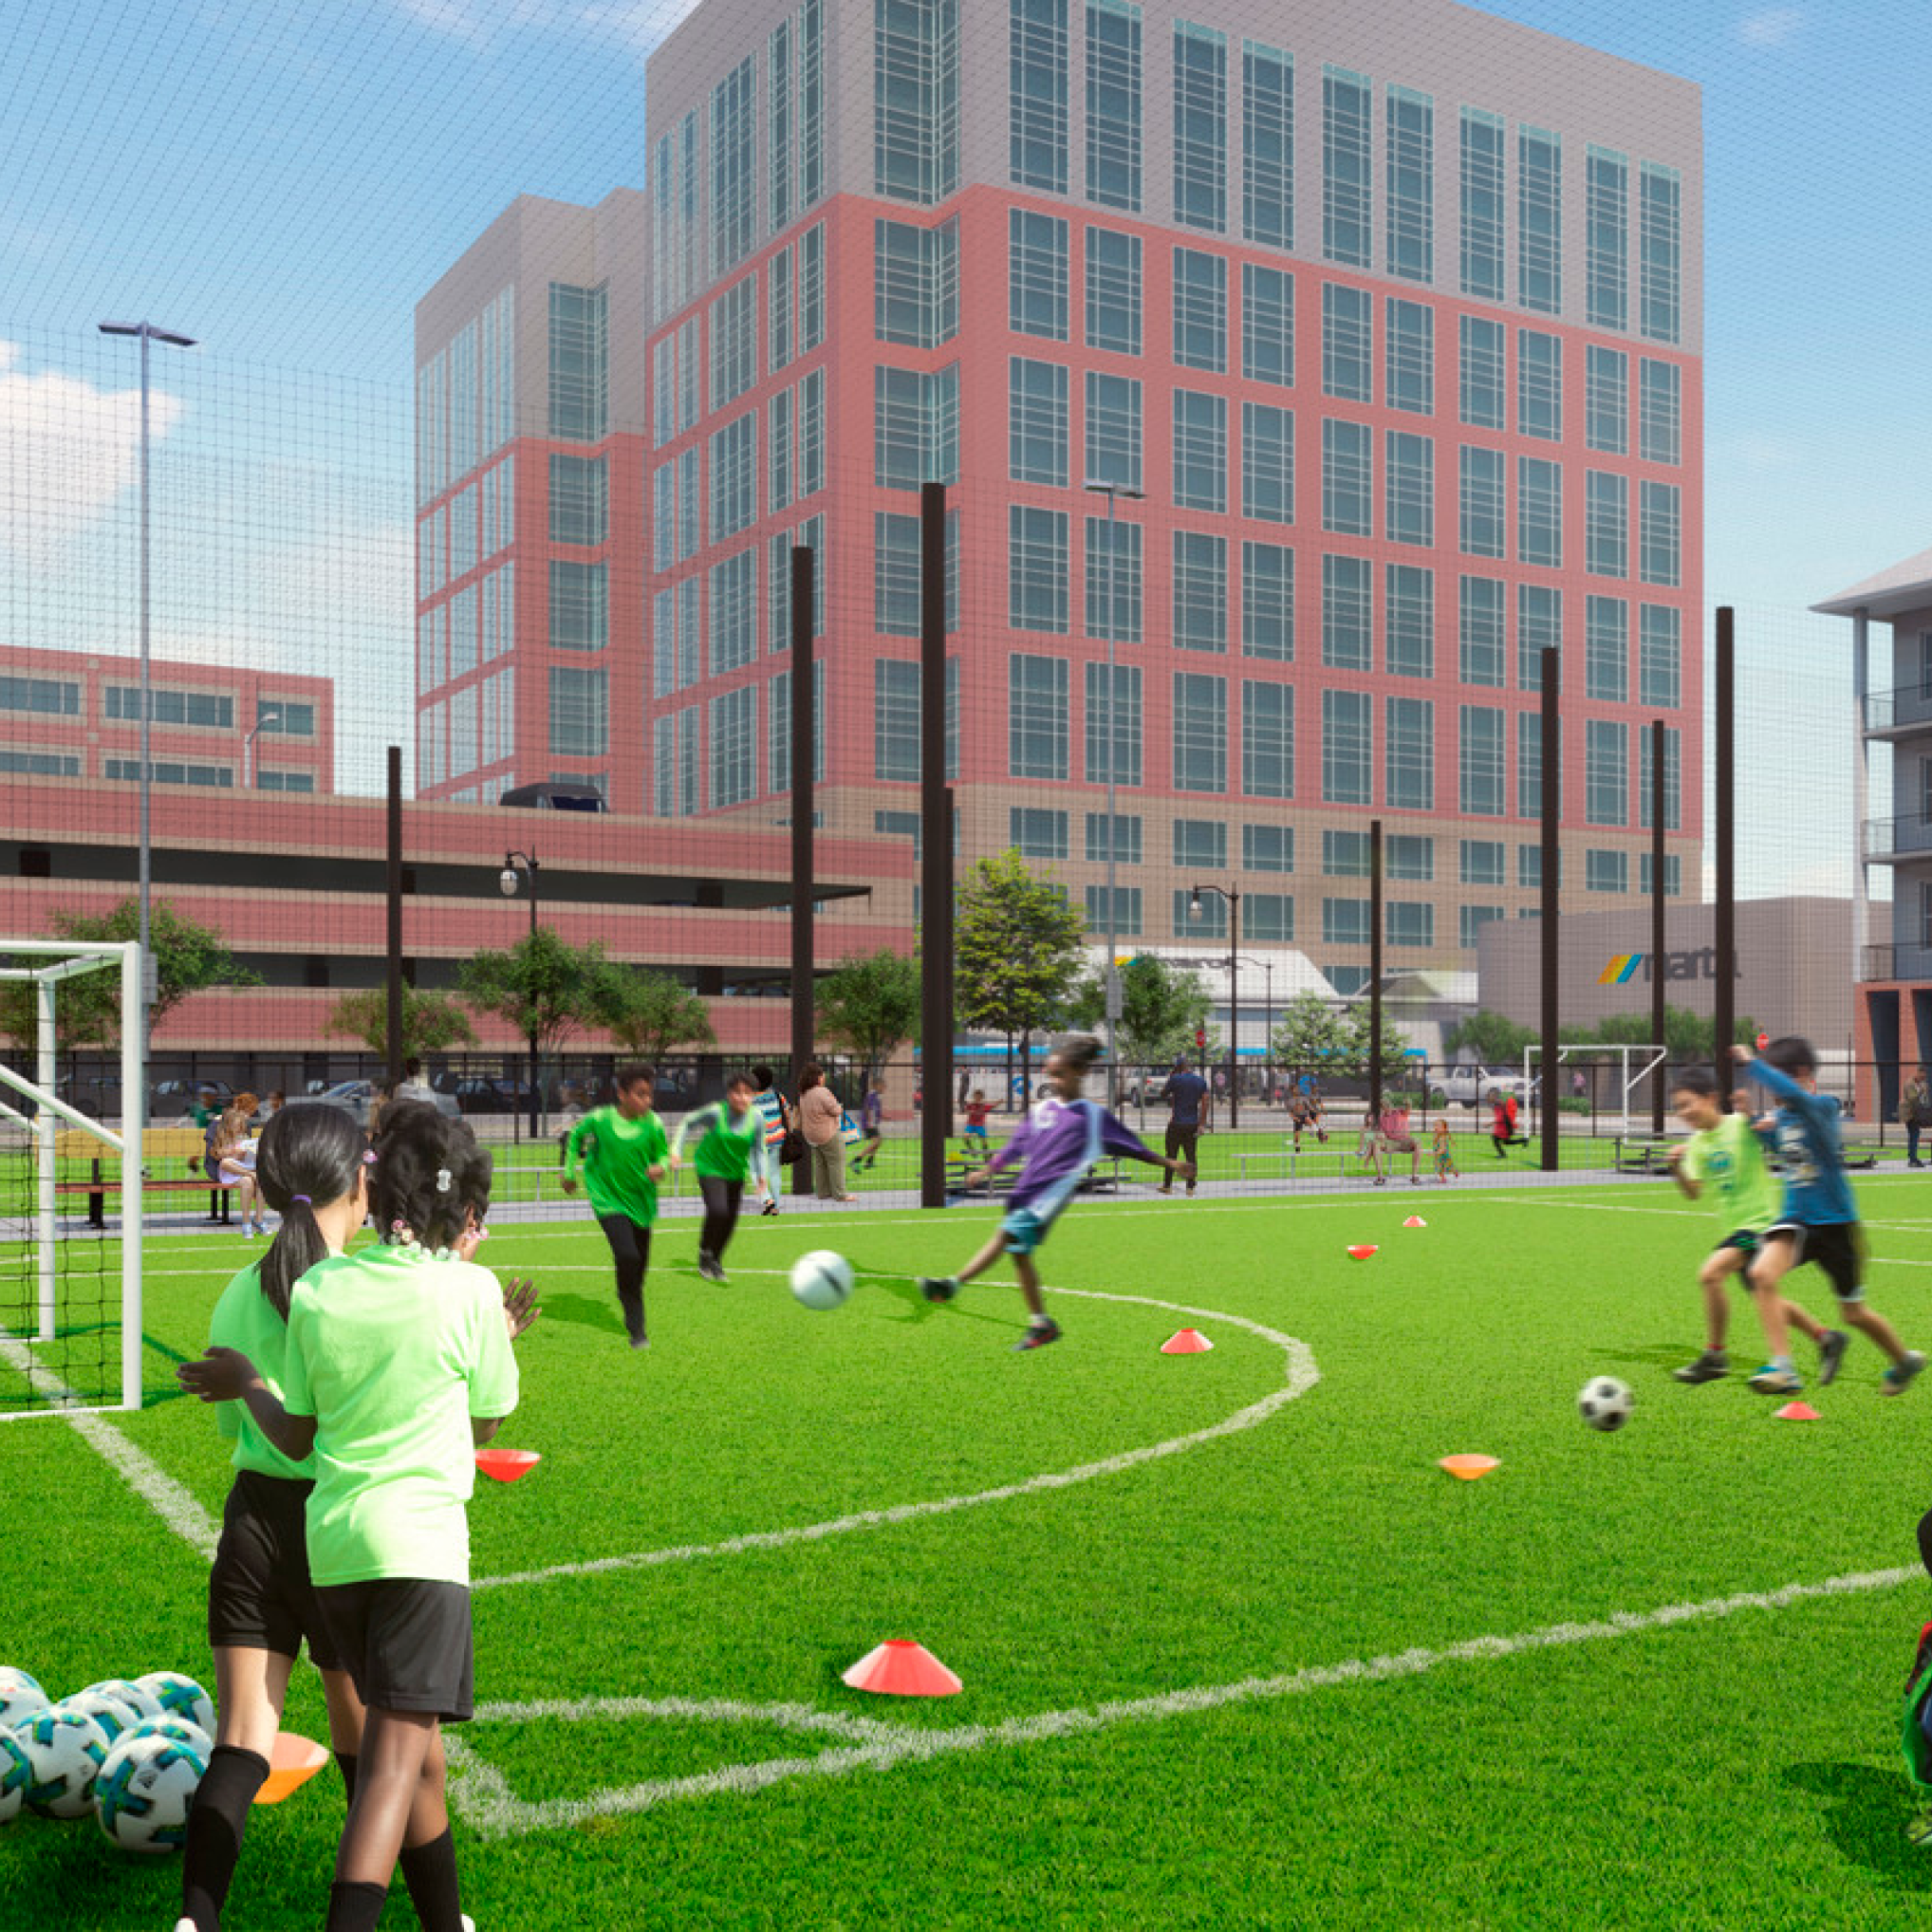 StationSoccer: In Atlanta, a Multi-site Transit Oriented Development Initiative Takes on the Play Equity Gap